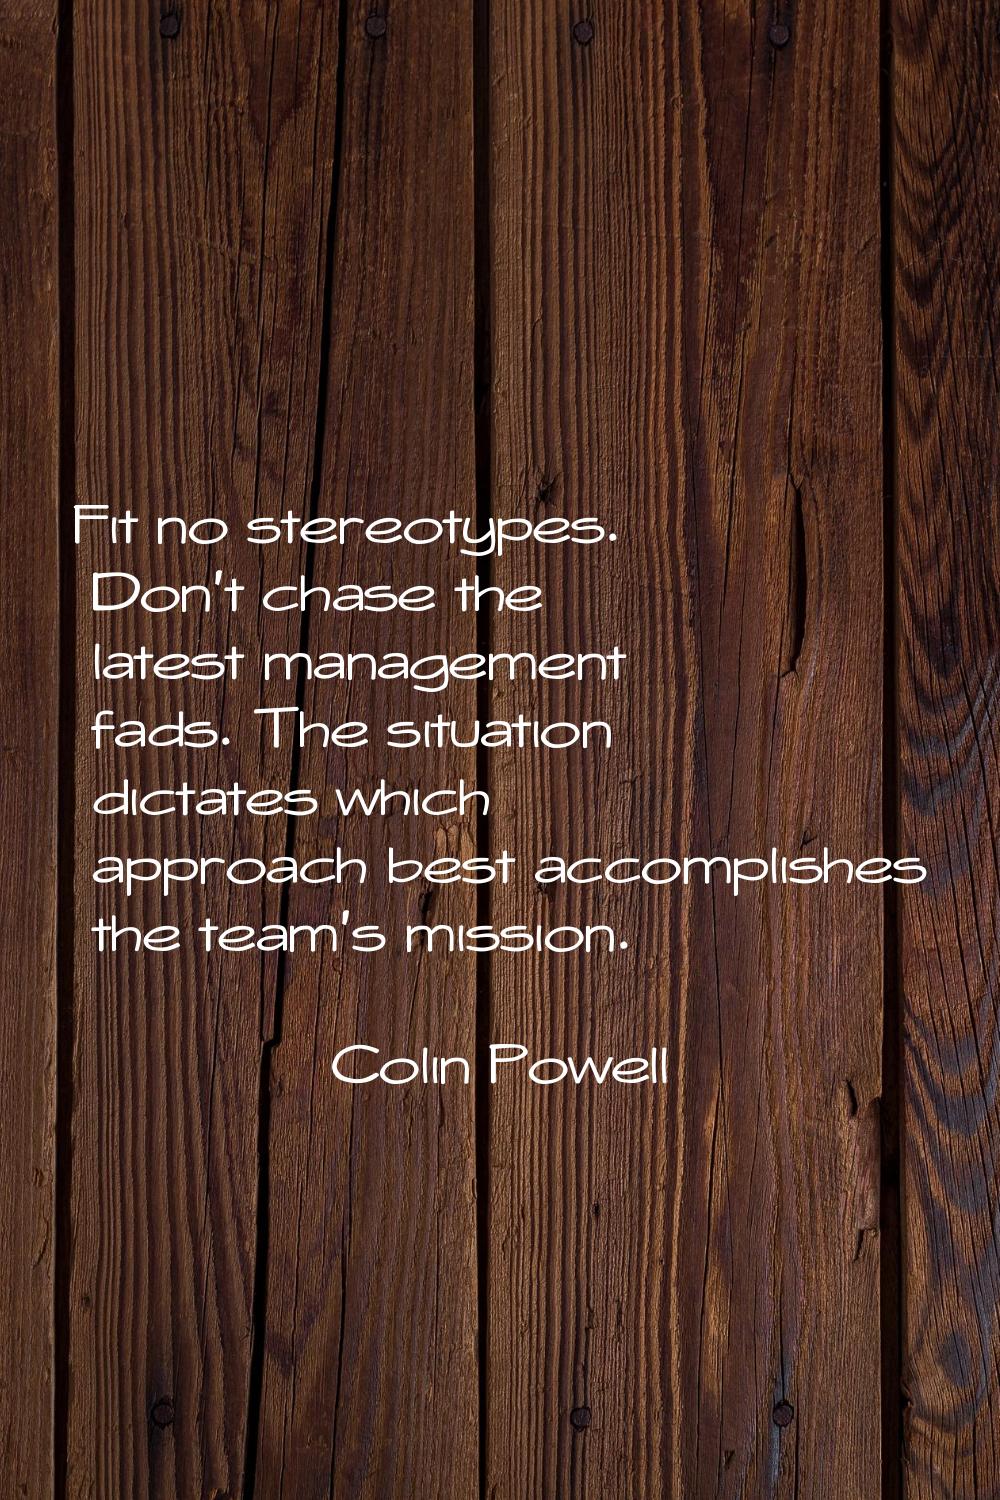 Fit no stereotypes. Don't chase the latest management fads. The situation dictates which approach b